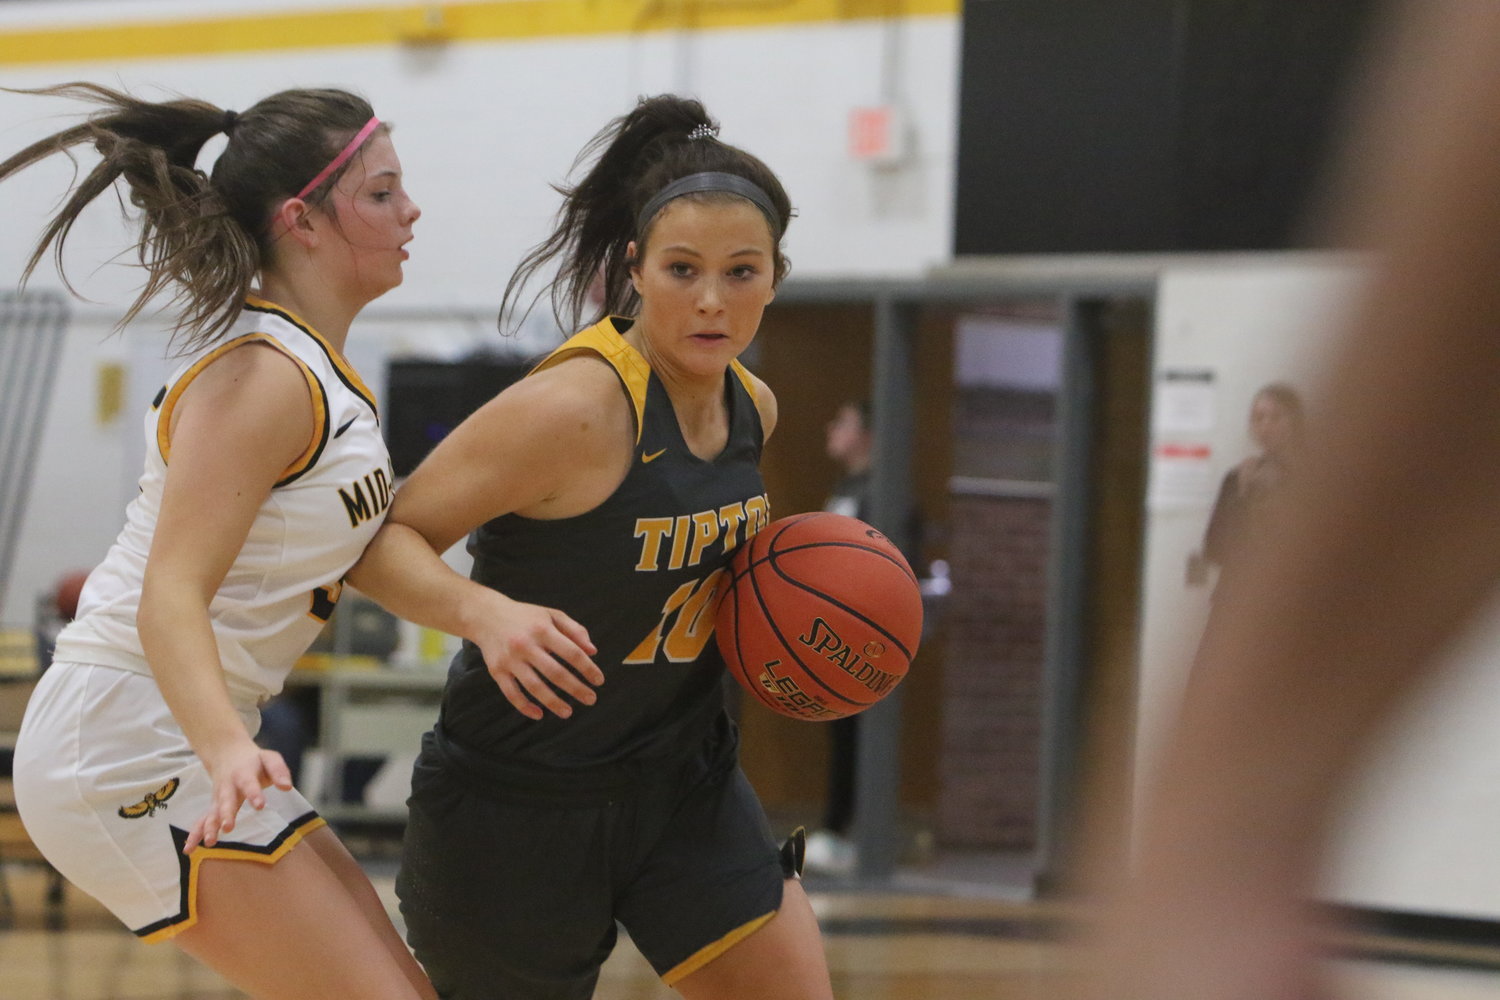 Mid-Prairie sophomore Nora Pennington, left, puts defensive pressure on Tipton's Brenna Wilkins in a game played December 3. Pennington had a career-high 7 steals in the Golden Hawks' 57-20 win.